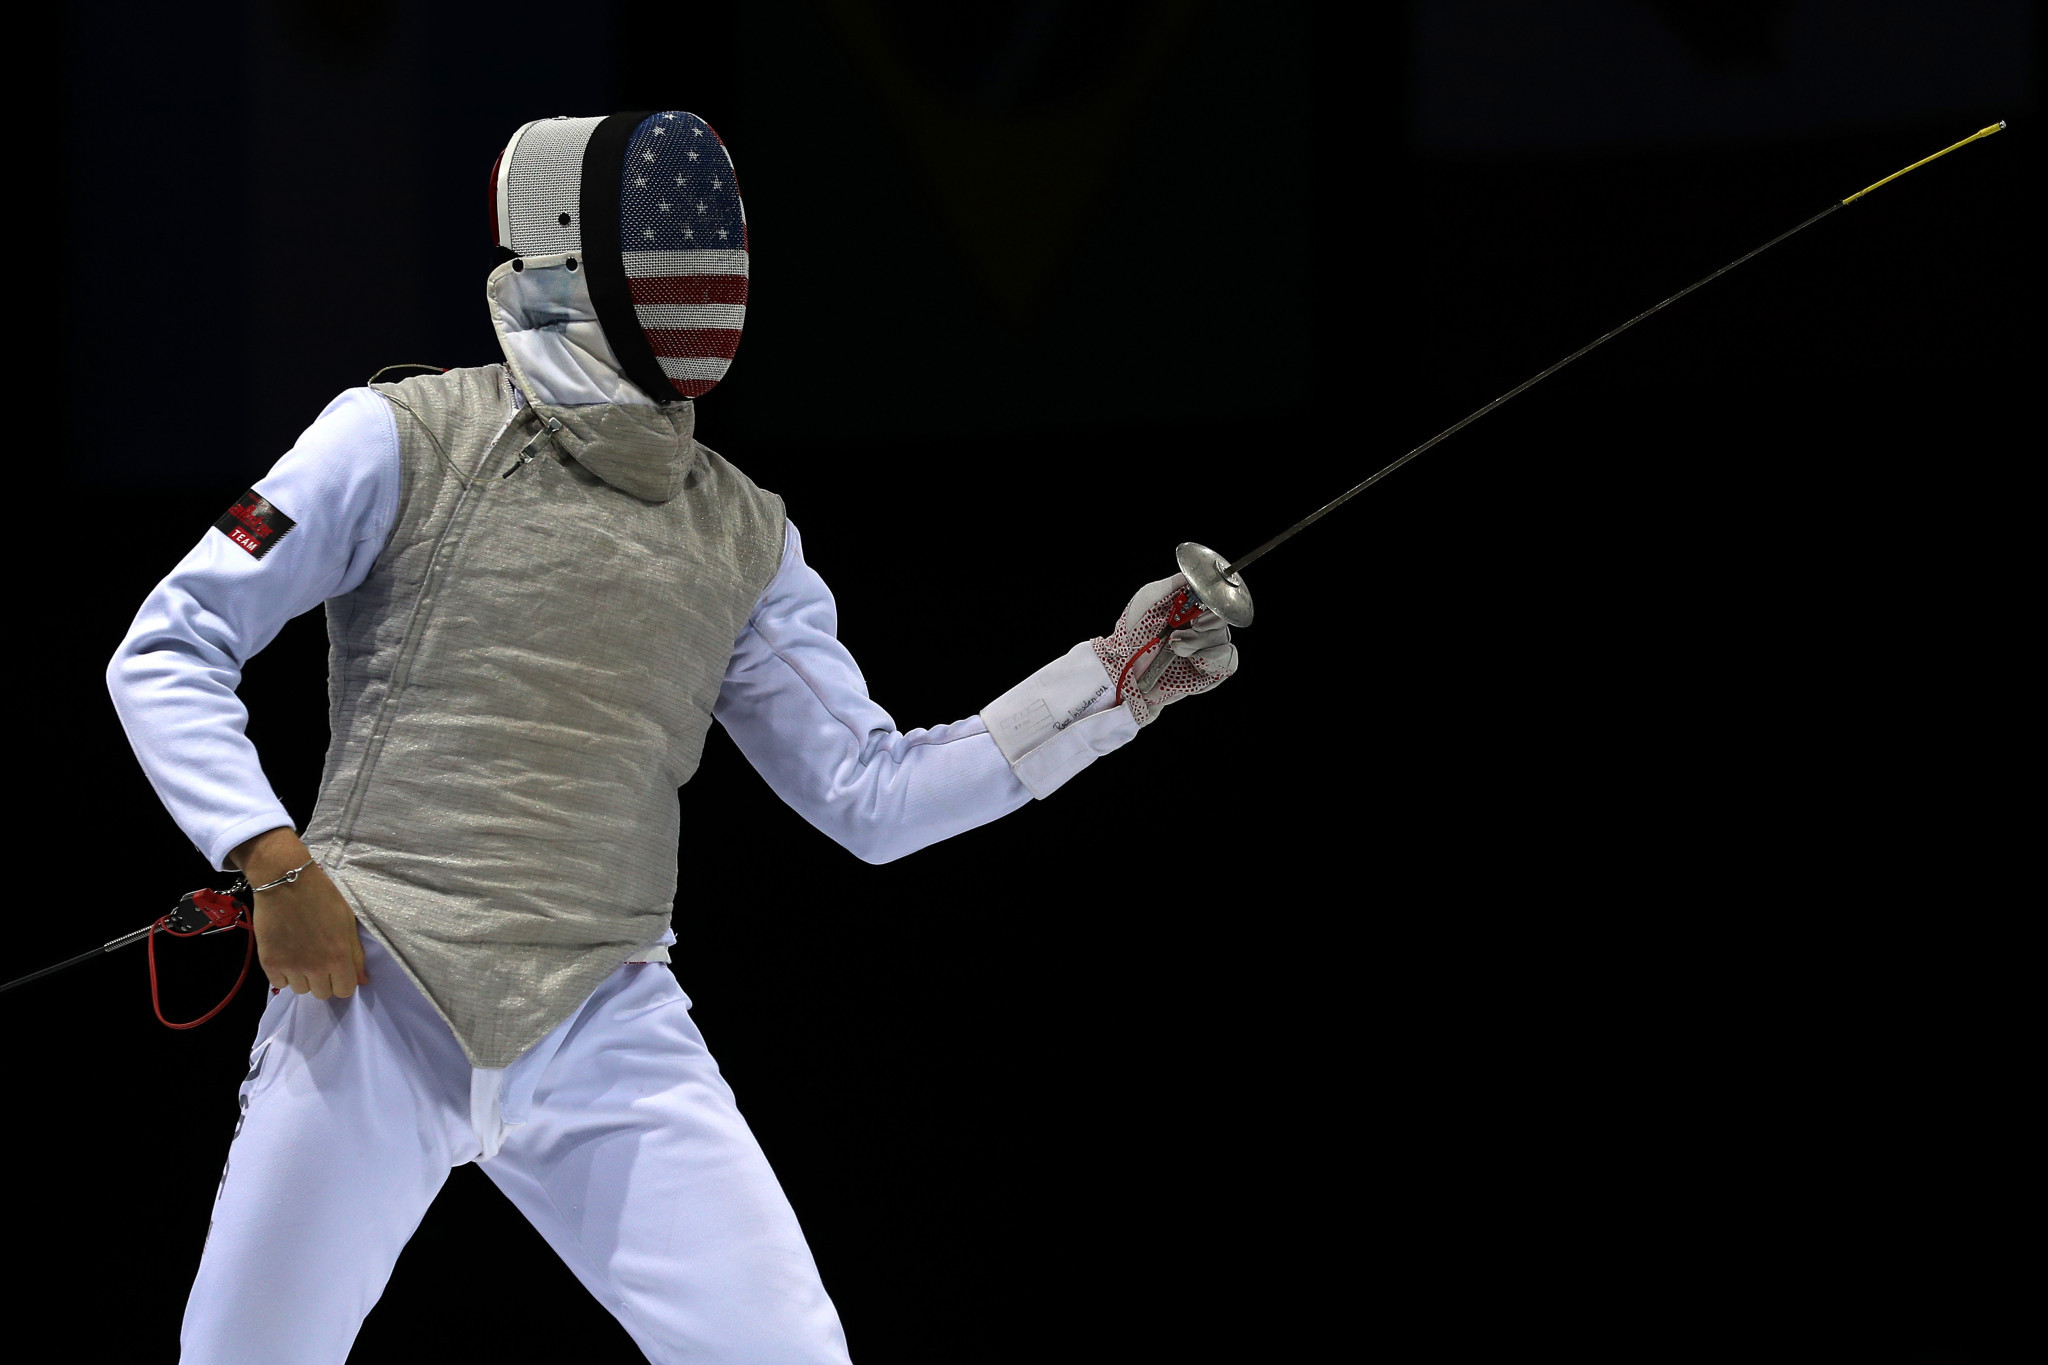 Race Imboden, the world number two and Rio 2016 bronze medallist from the United States, is among a stellar field for the FIE Men's Foil World Cup ©Getty Images